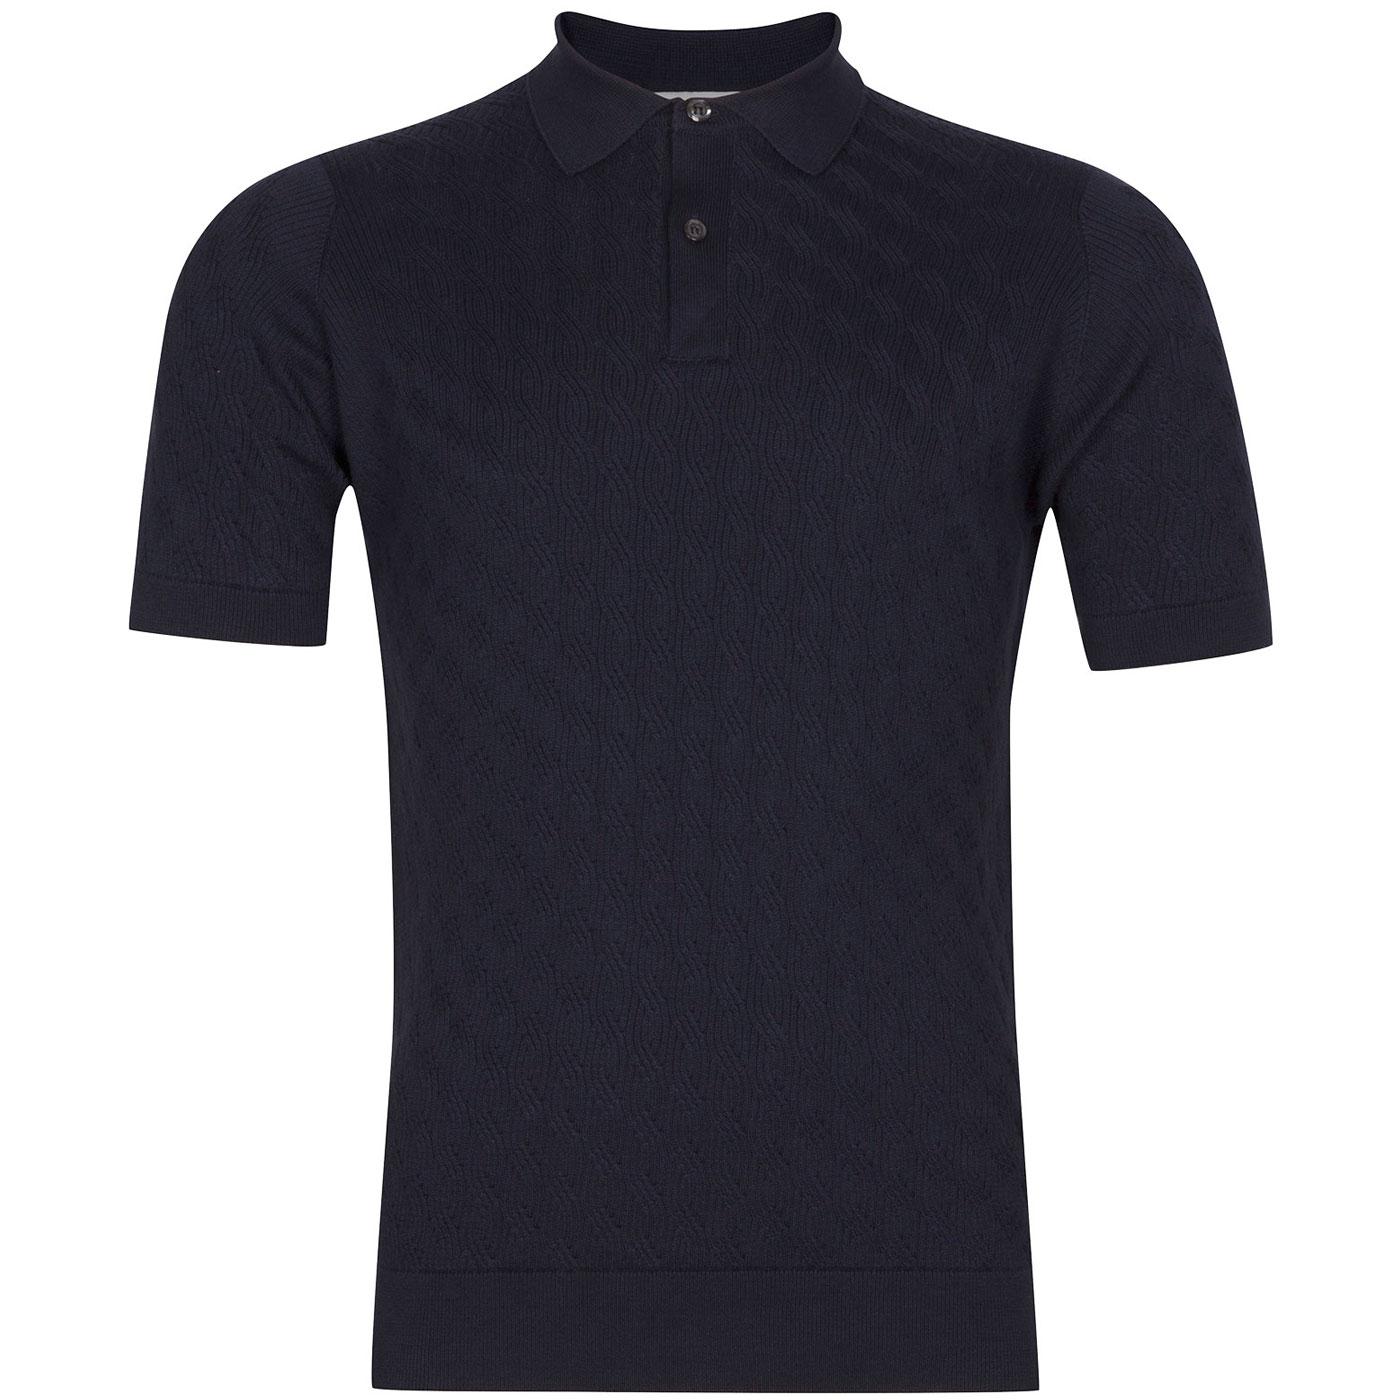 JOHN SMEDLEY Poplewell 60s Mod Cable Knit Polo Top Navy